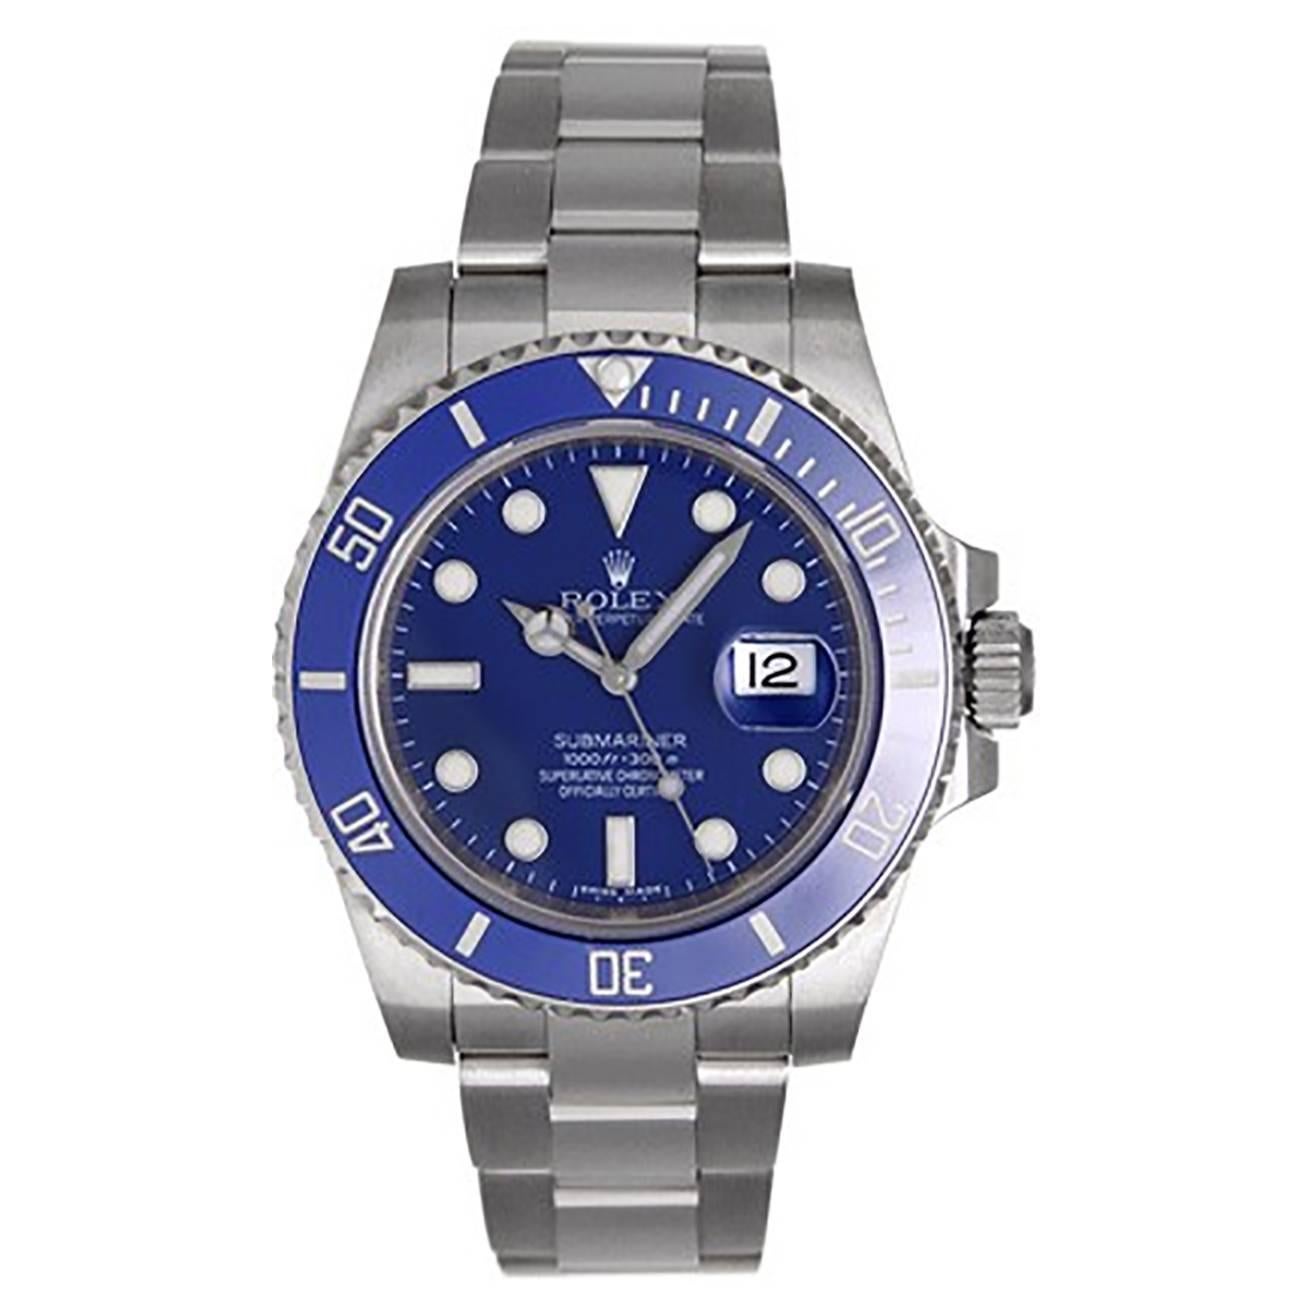 Rolex White Gold Blue Dial Submariner Automatic Wristwatch 